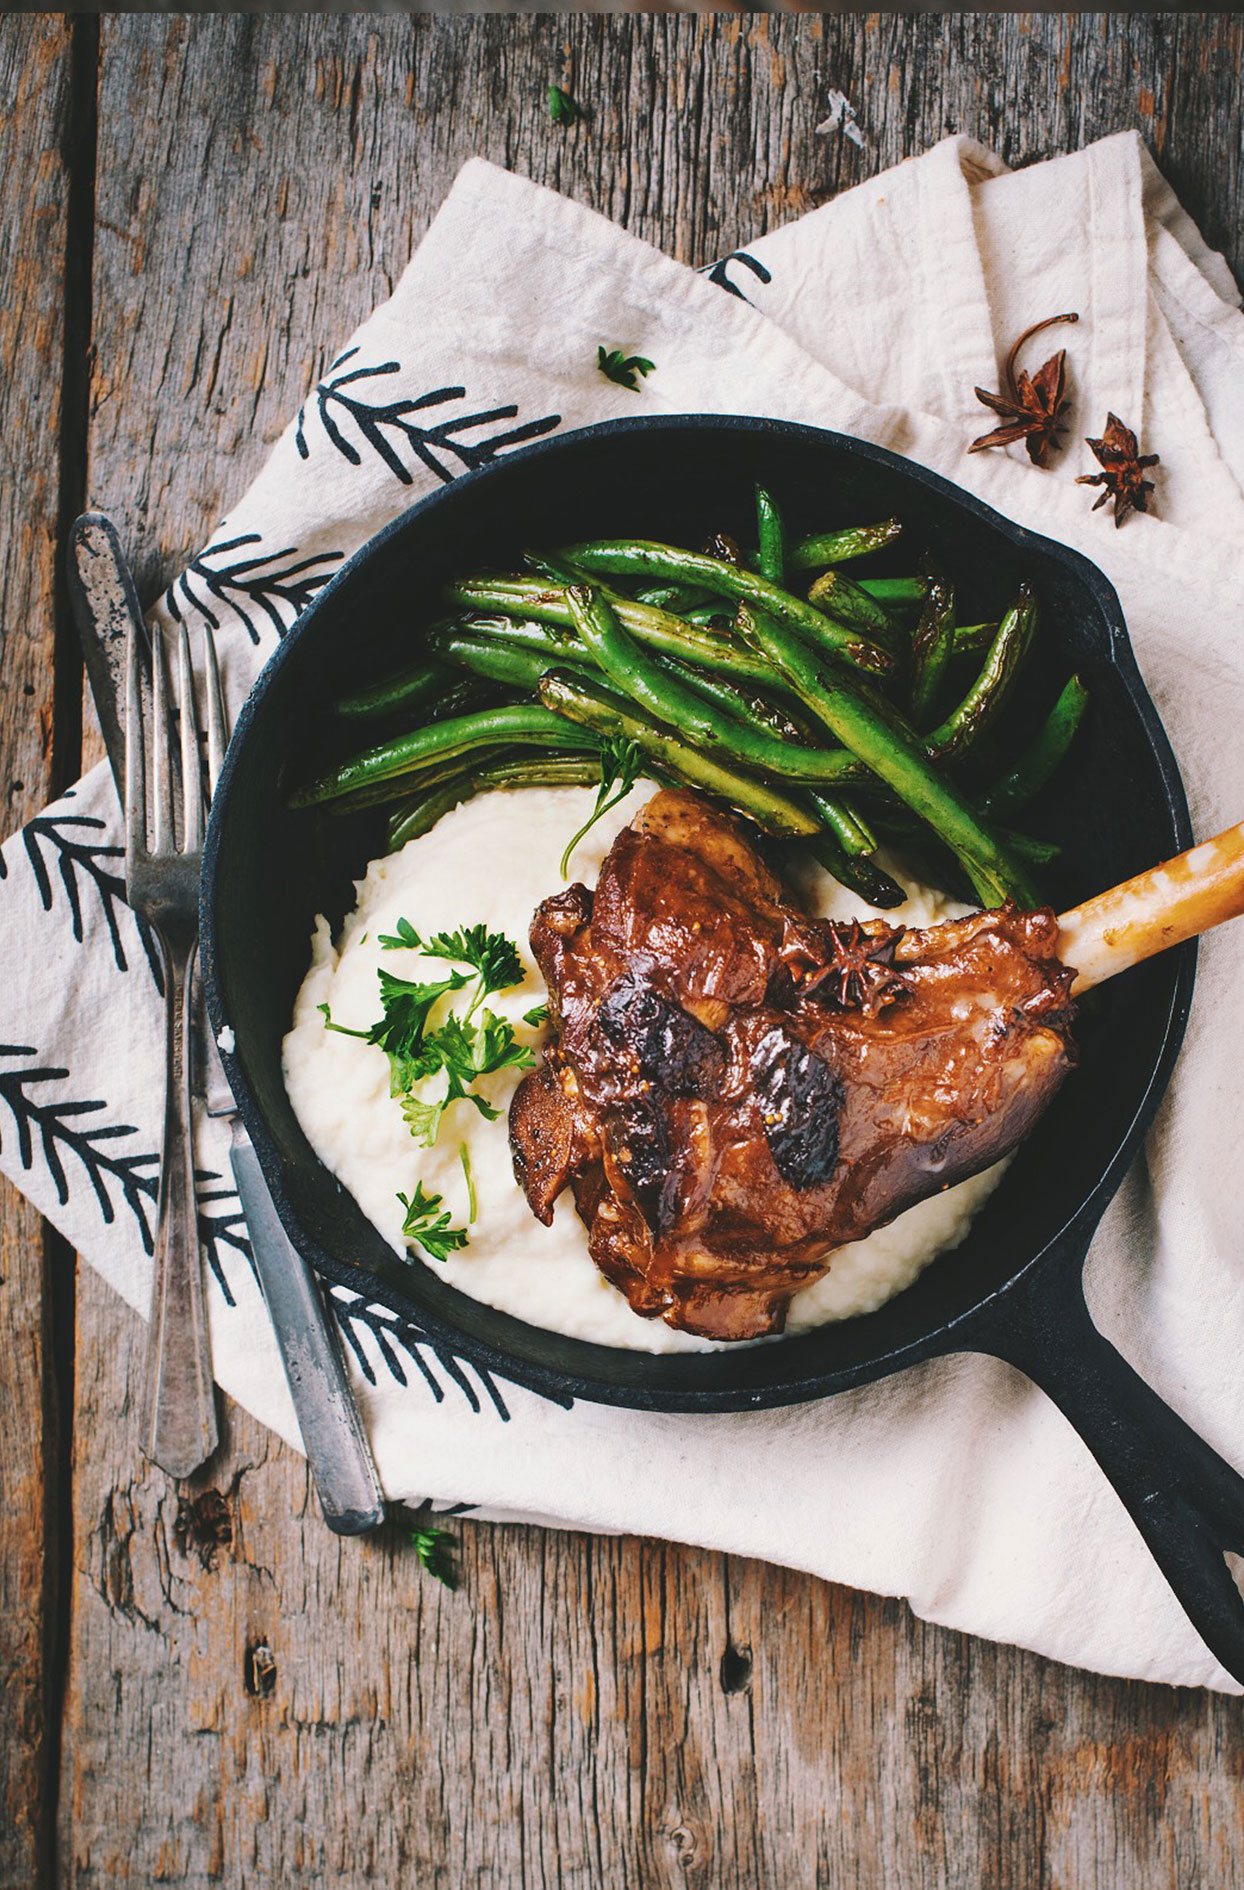 Lamb shanks braised with cherry beer and port